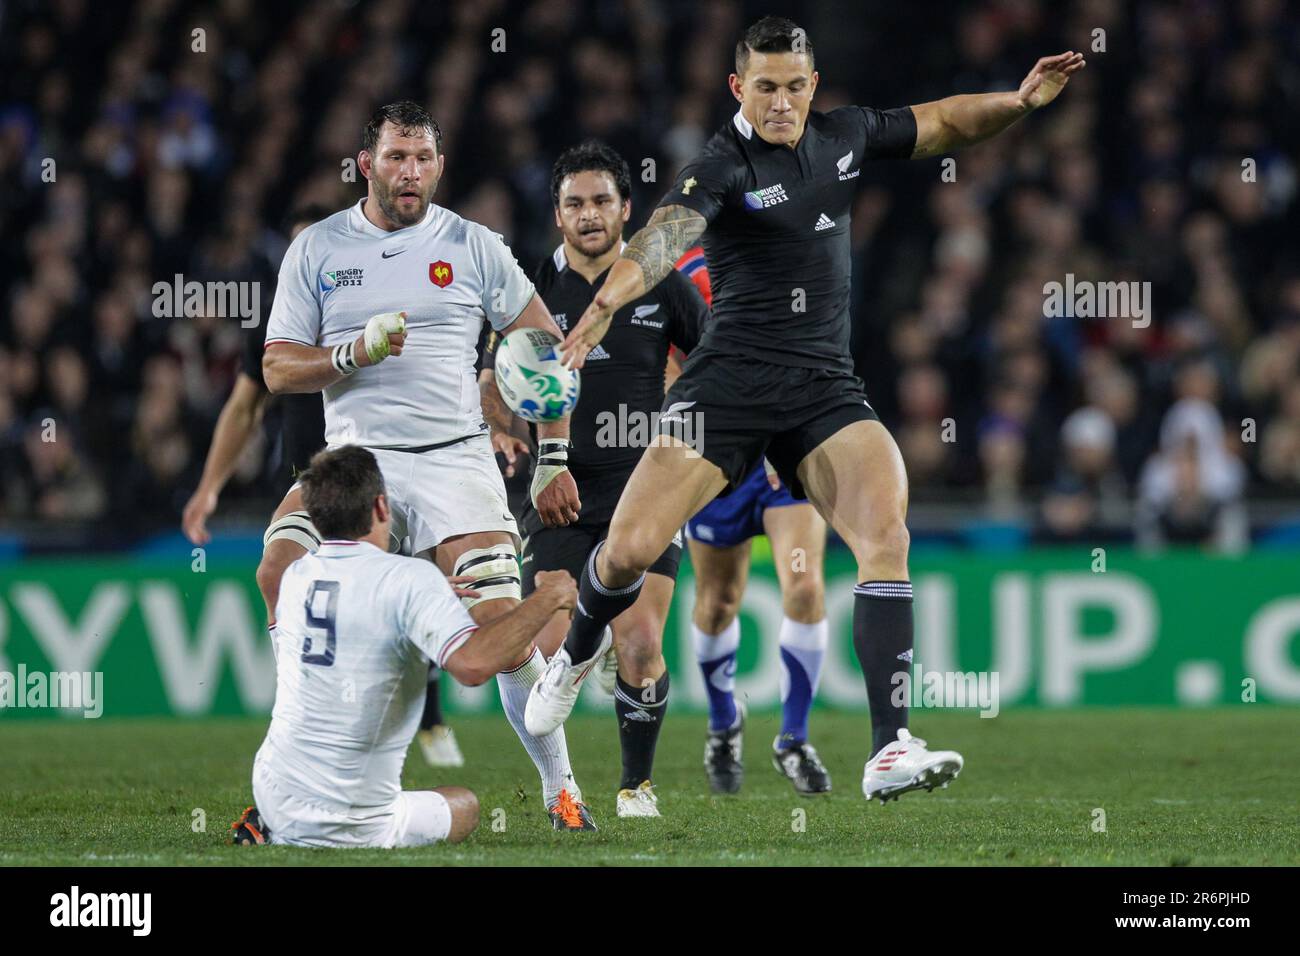 New Zealand’s Sonny Bill Williams in action against France during a Pool A match of the Rugby World Cup 2011, Eden Park, Auckland, New Zealand, Saturday, September 24, 2011. Stock Photo